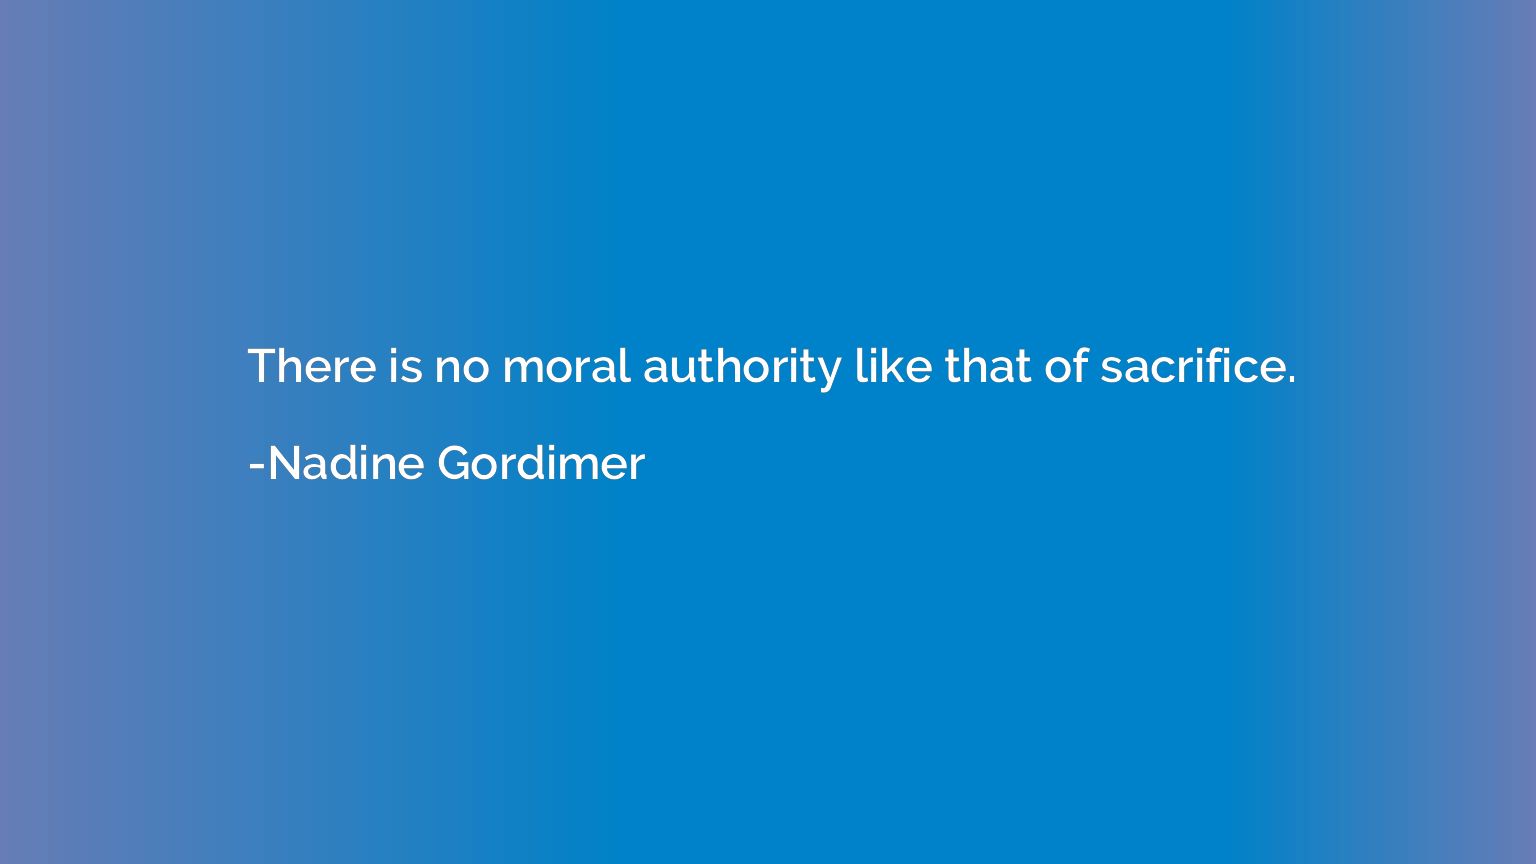 There is no moral authority like that of sacrifice.